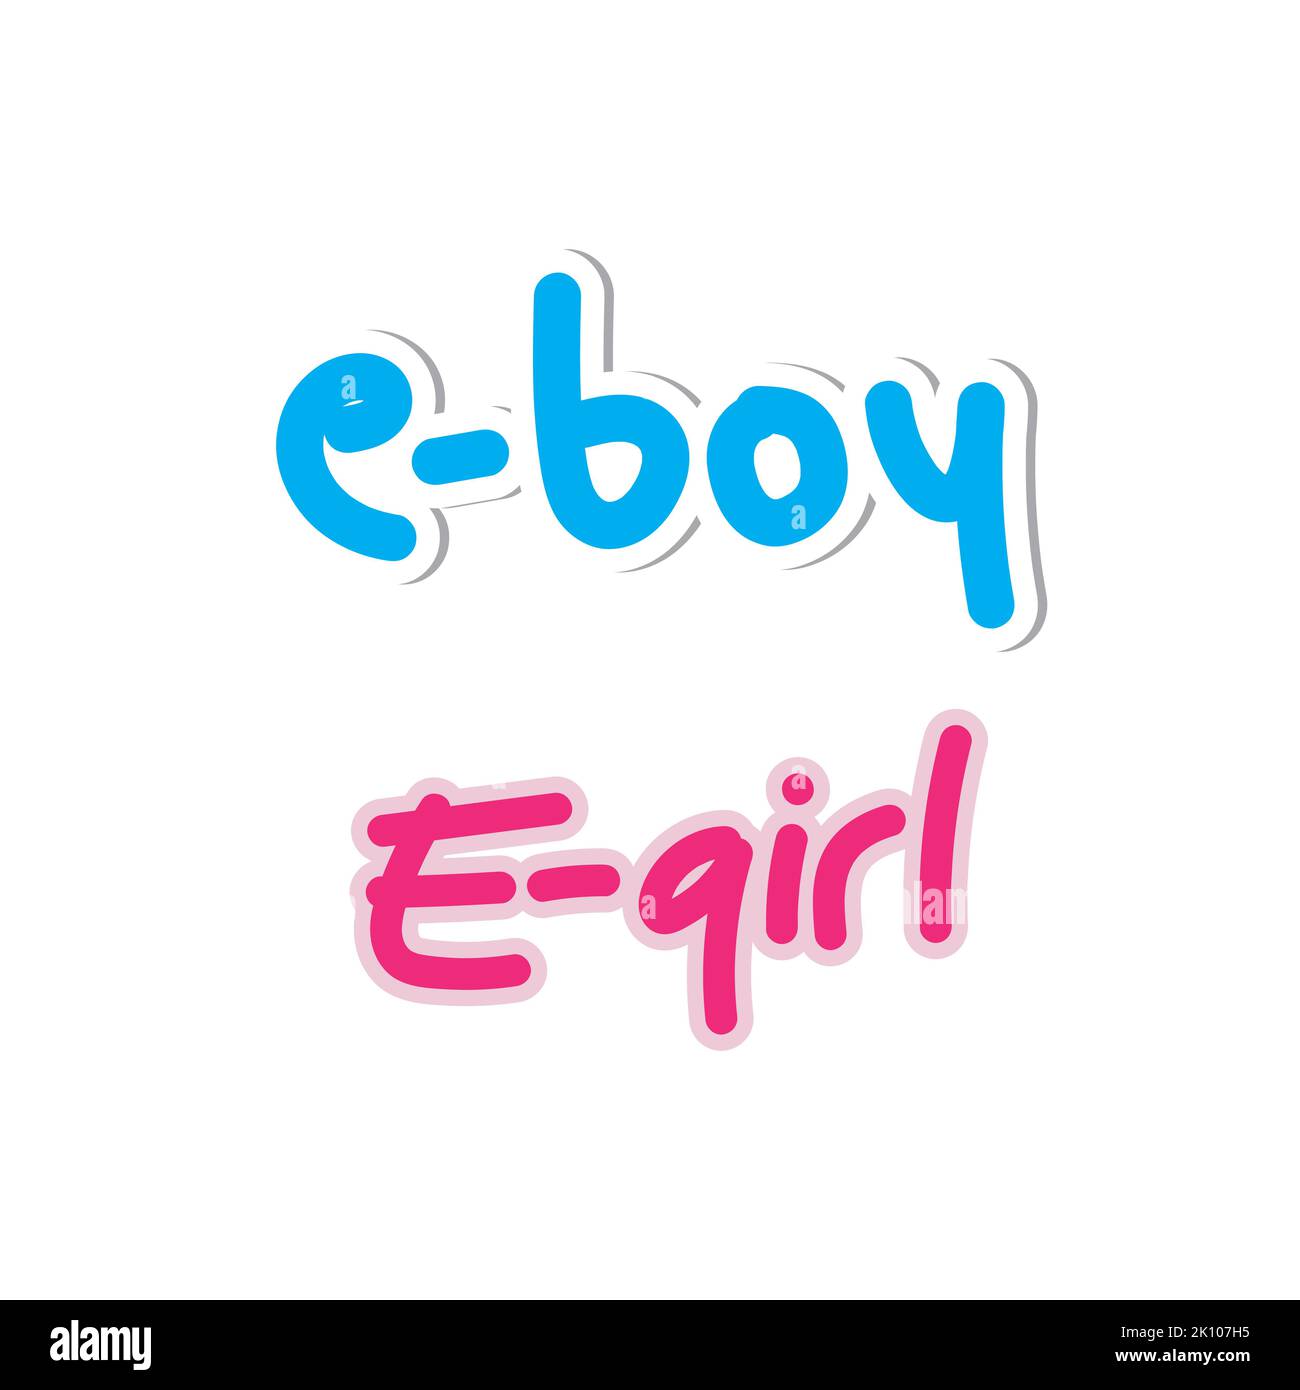 This is similar to emo or goth culture, but they use the internet to express themselves.. E-boy and E-girl. Gen z slang word in vector Stock Vector